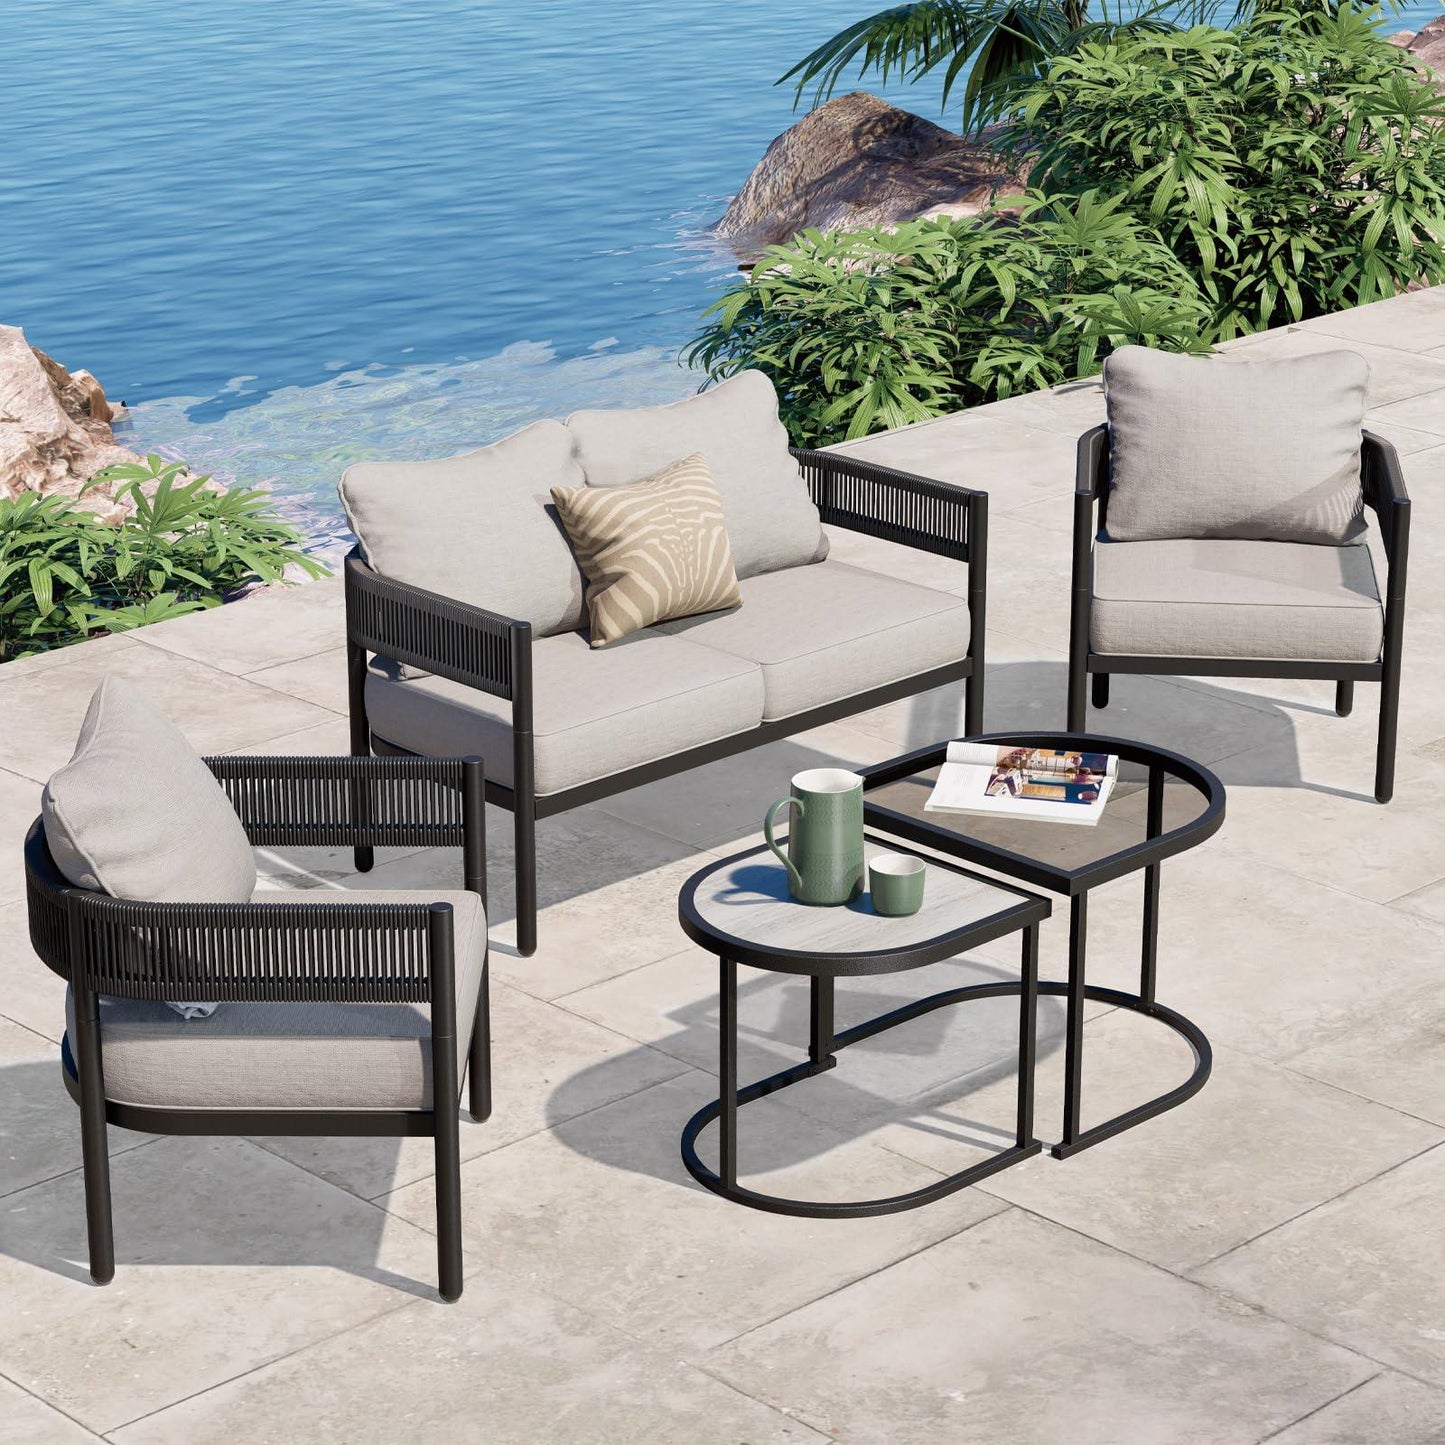 Grand patio 5-Piece Outdoor Conversation Set, Woven Wicker, Steel Frame, with Olefin Cushions and Nested Table, Patio Furniture for Backyard, Beige - CookCave